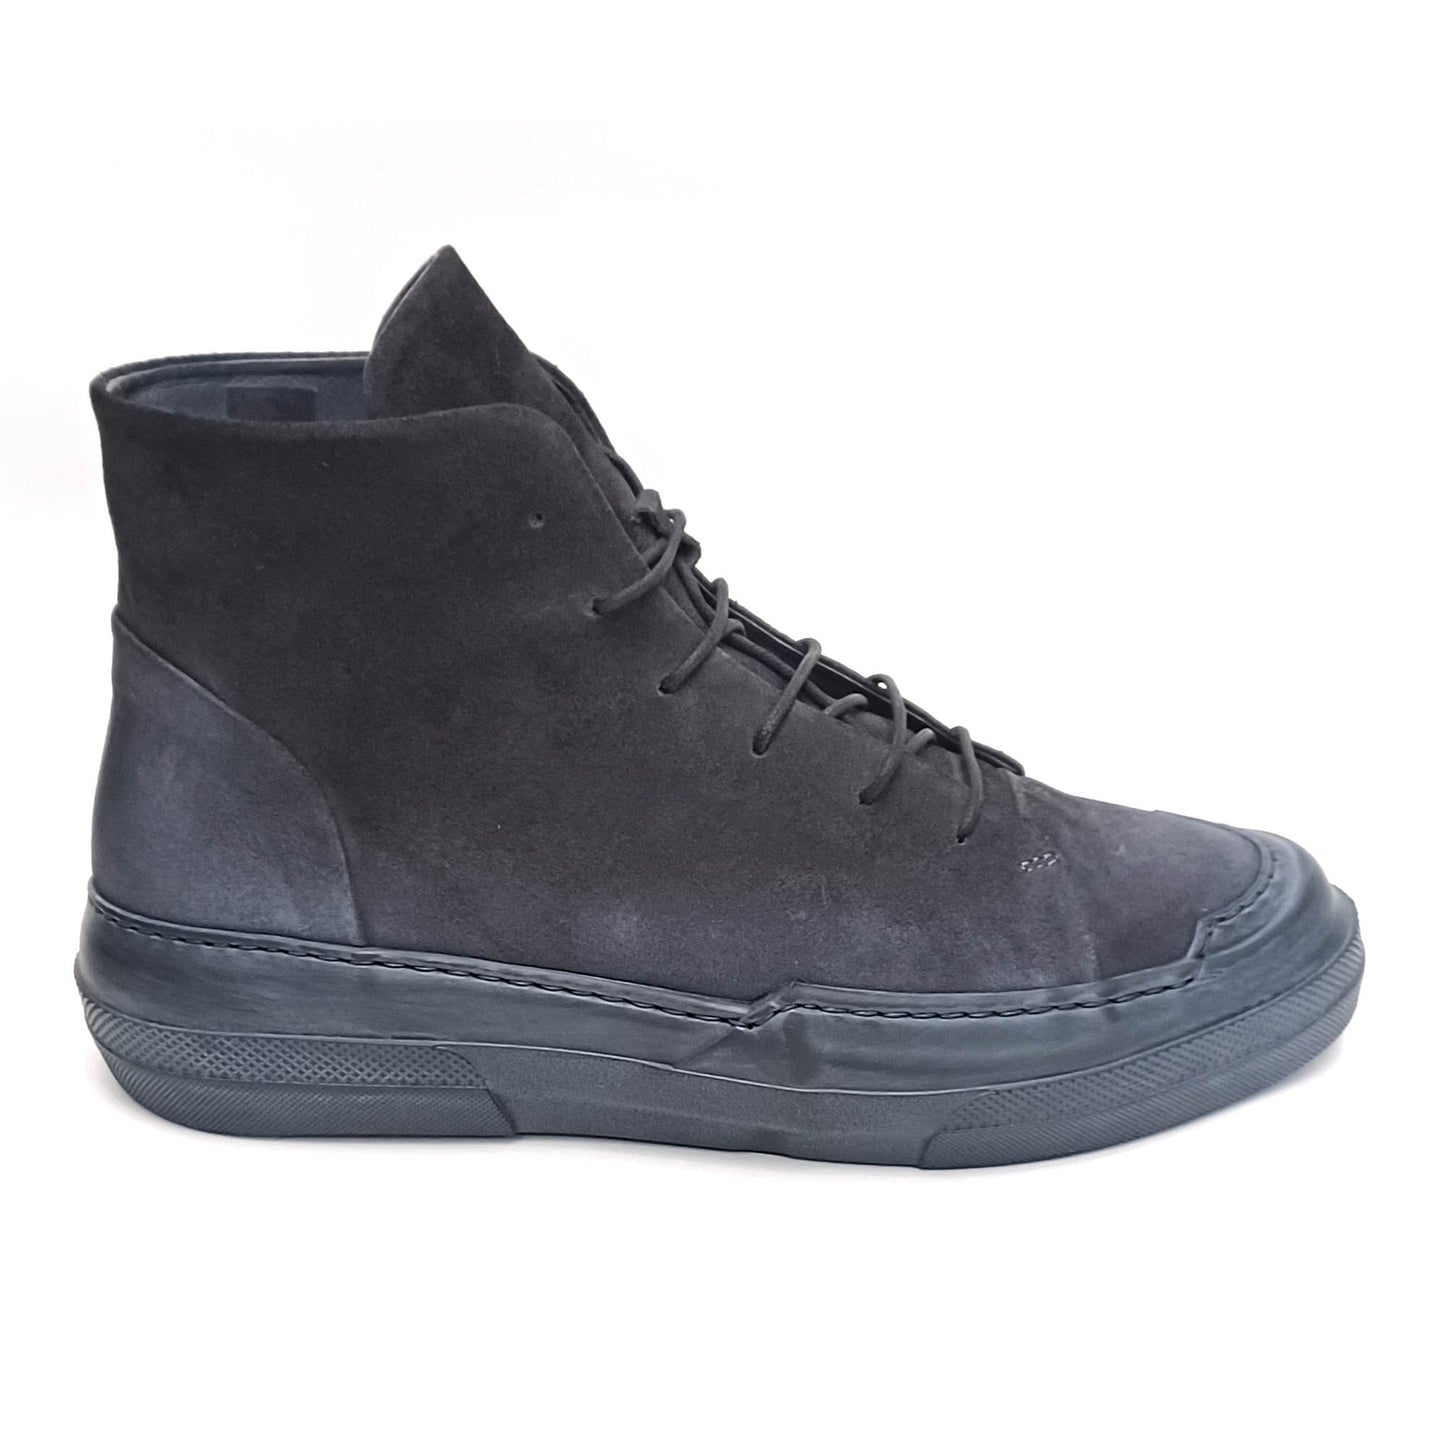 Lofina Charcoal Suede Ankle Boots- MENS